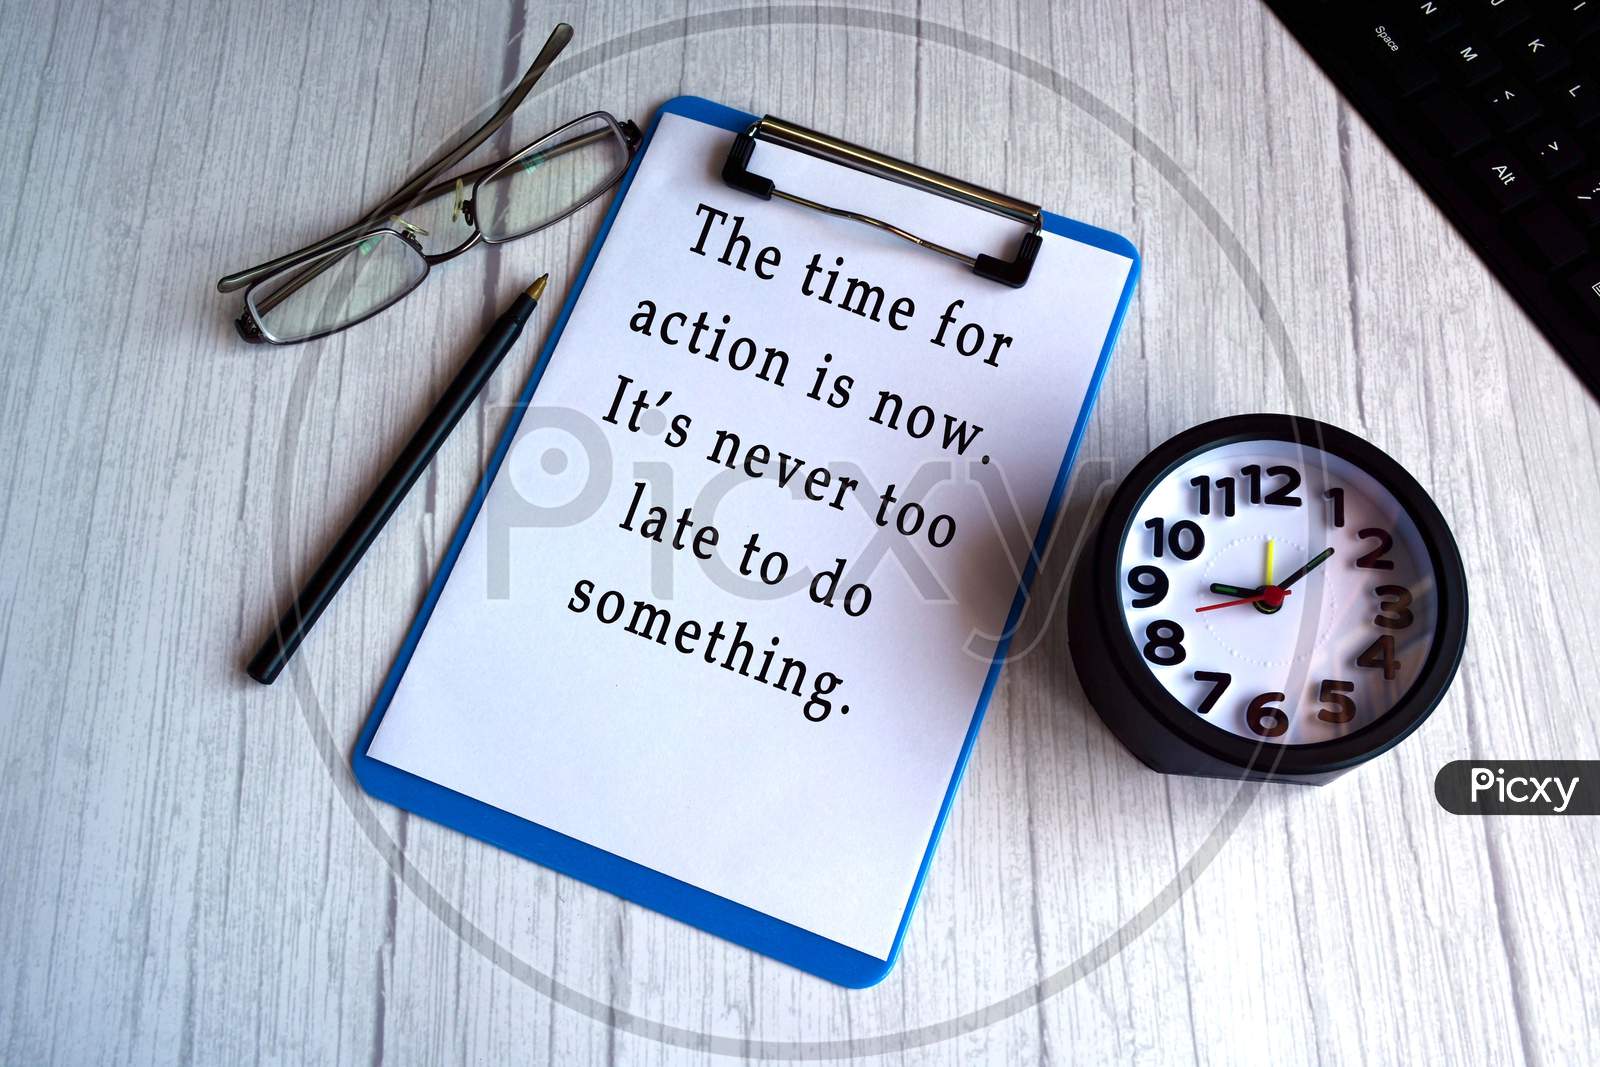 Motivational And Inspirational Quote On Blue Clip Board With Alarm Clock, Glasses, Pen And Keyboard On Wooden Desk